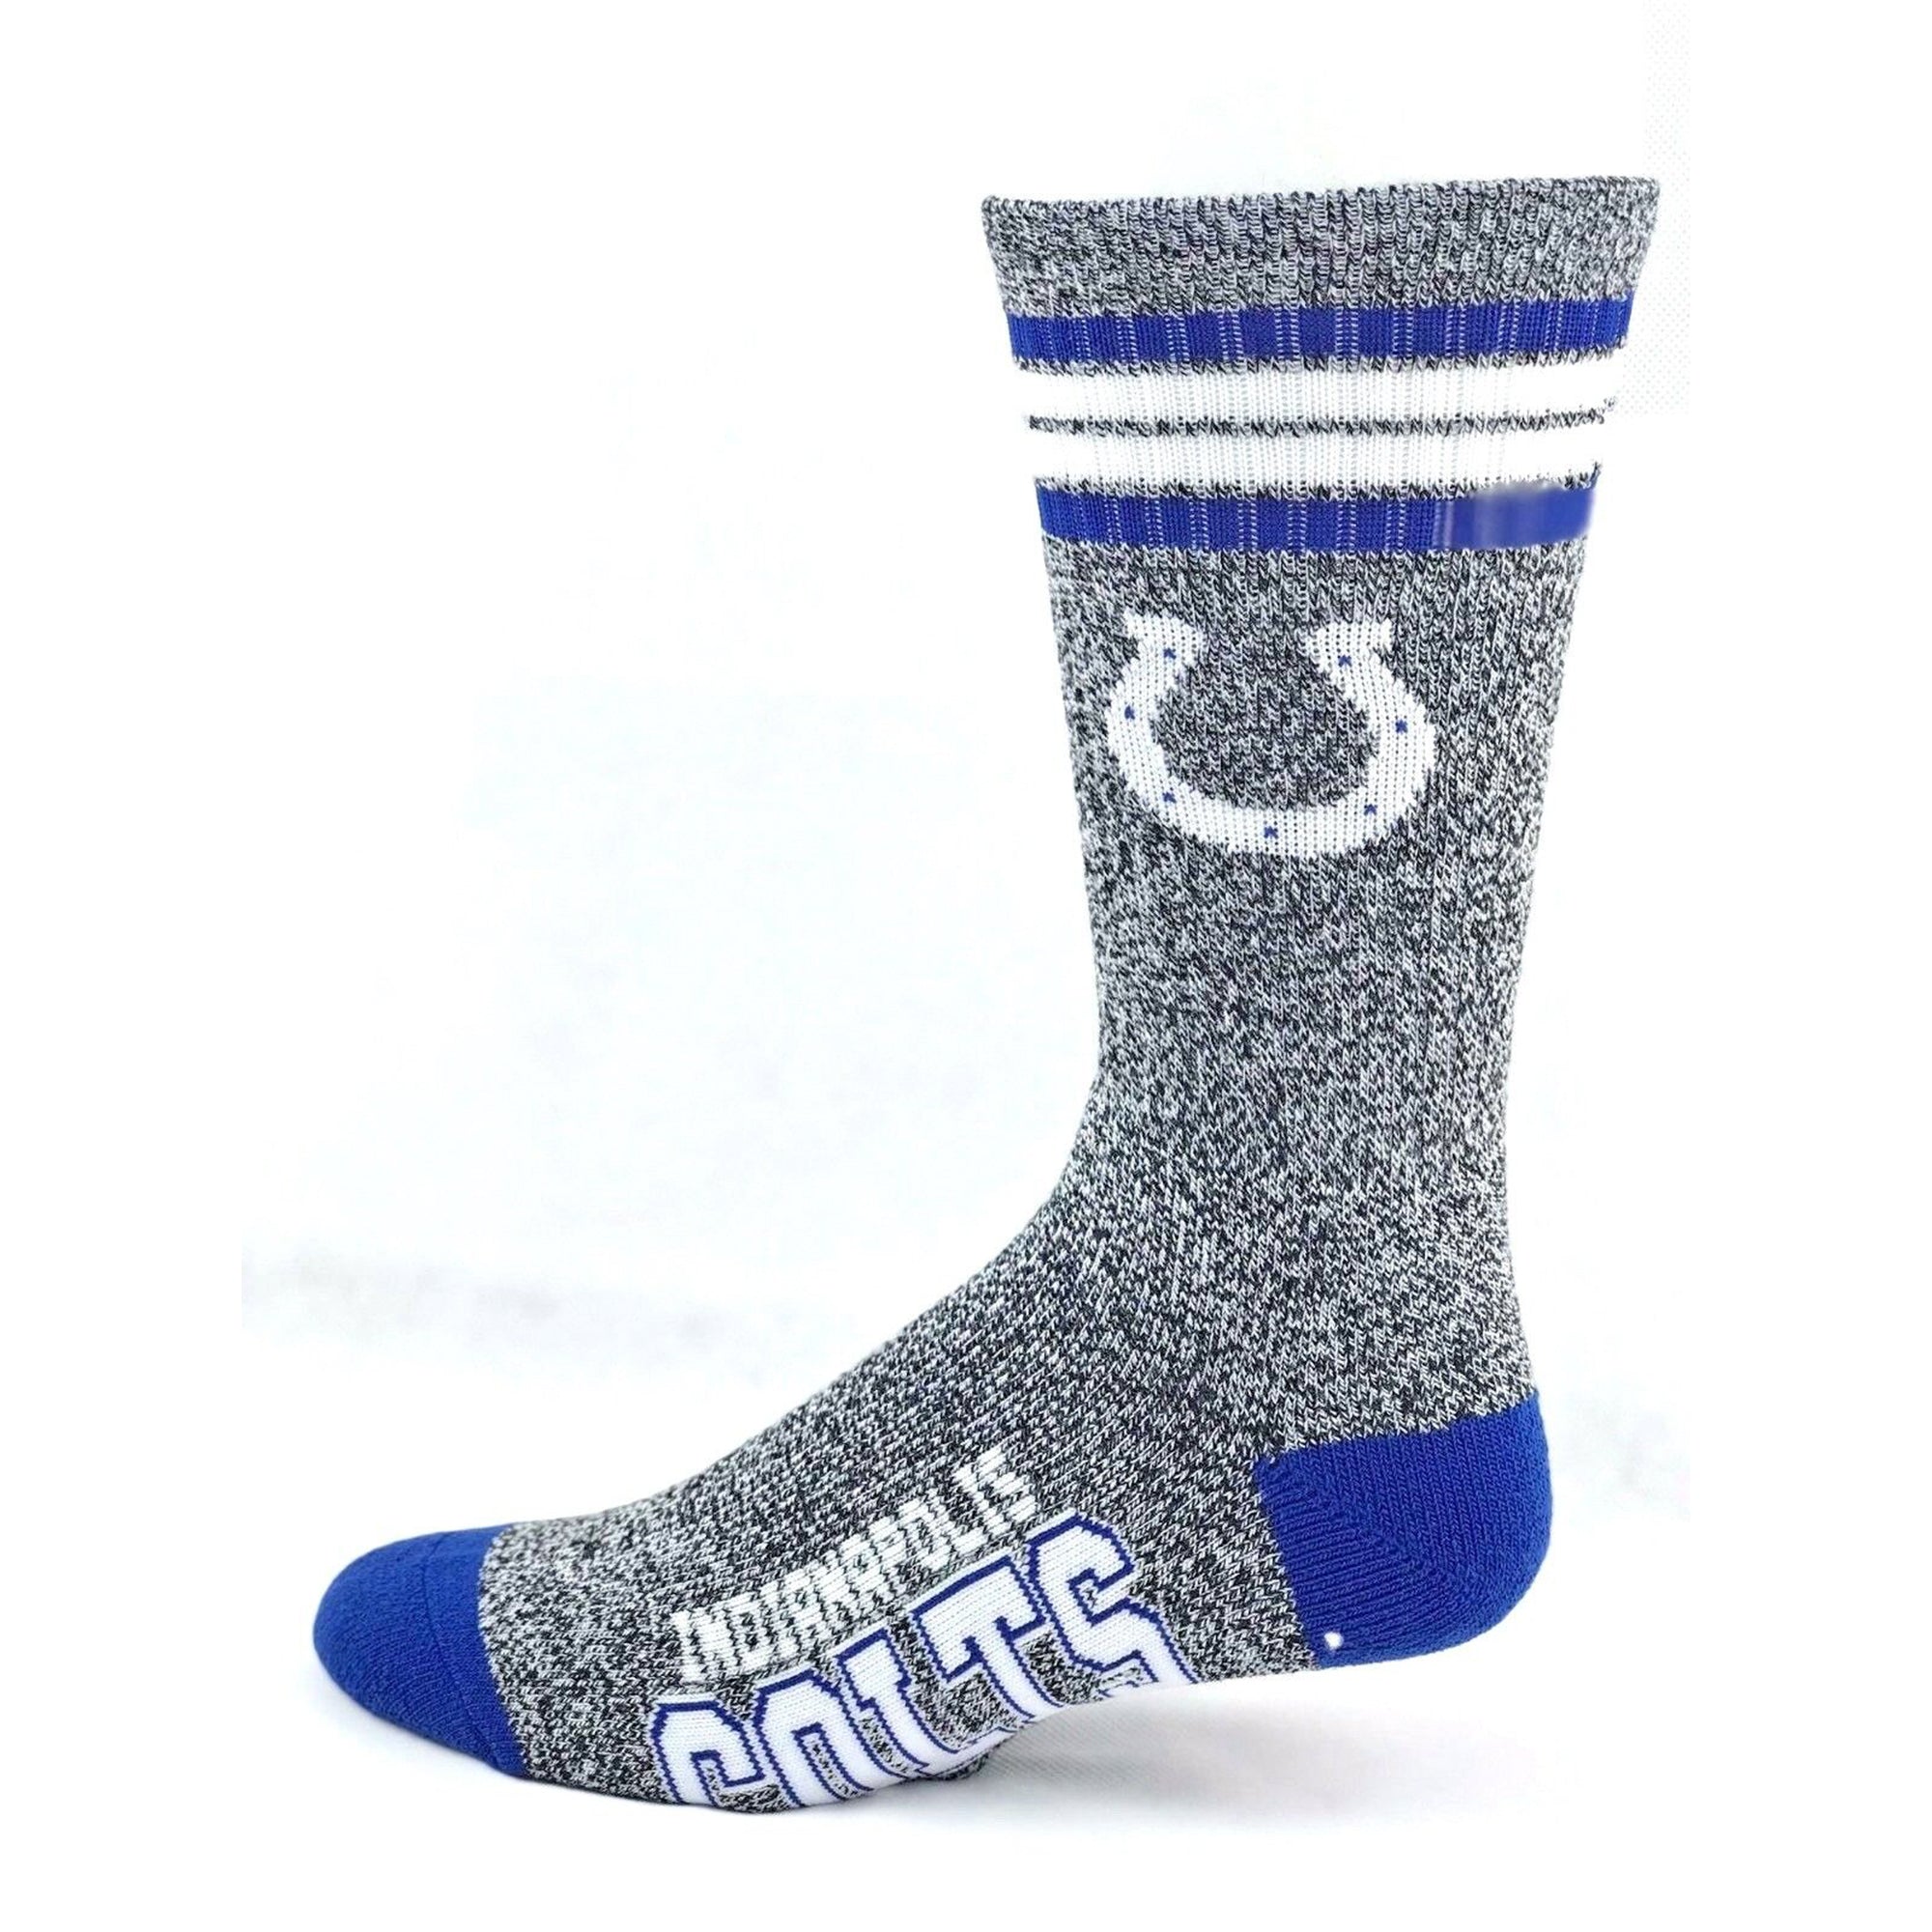 For Bare Feet Men Indianapolis Colts Socks (Colts)-Colts-Large-Nexus Clothing